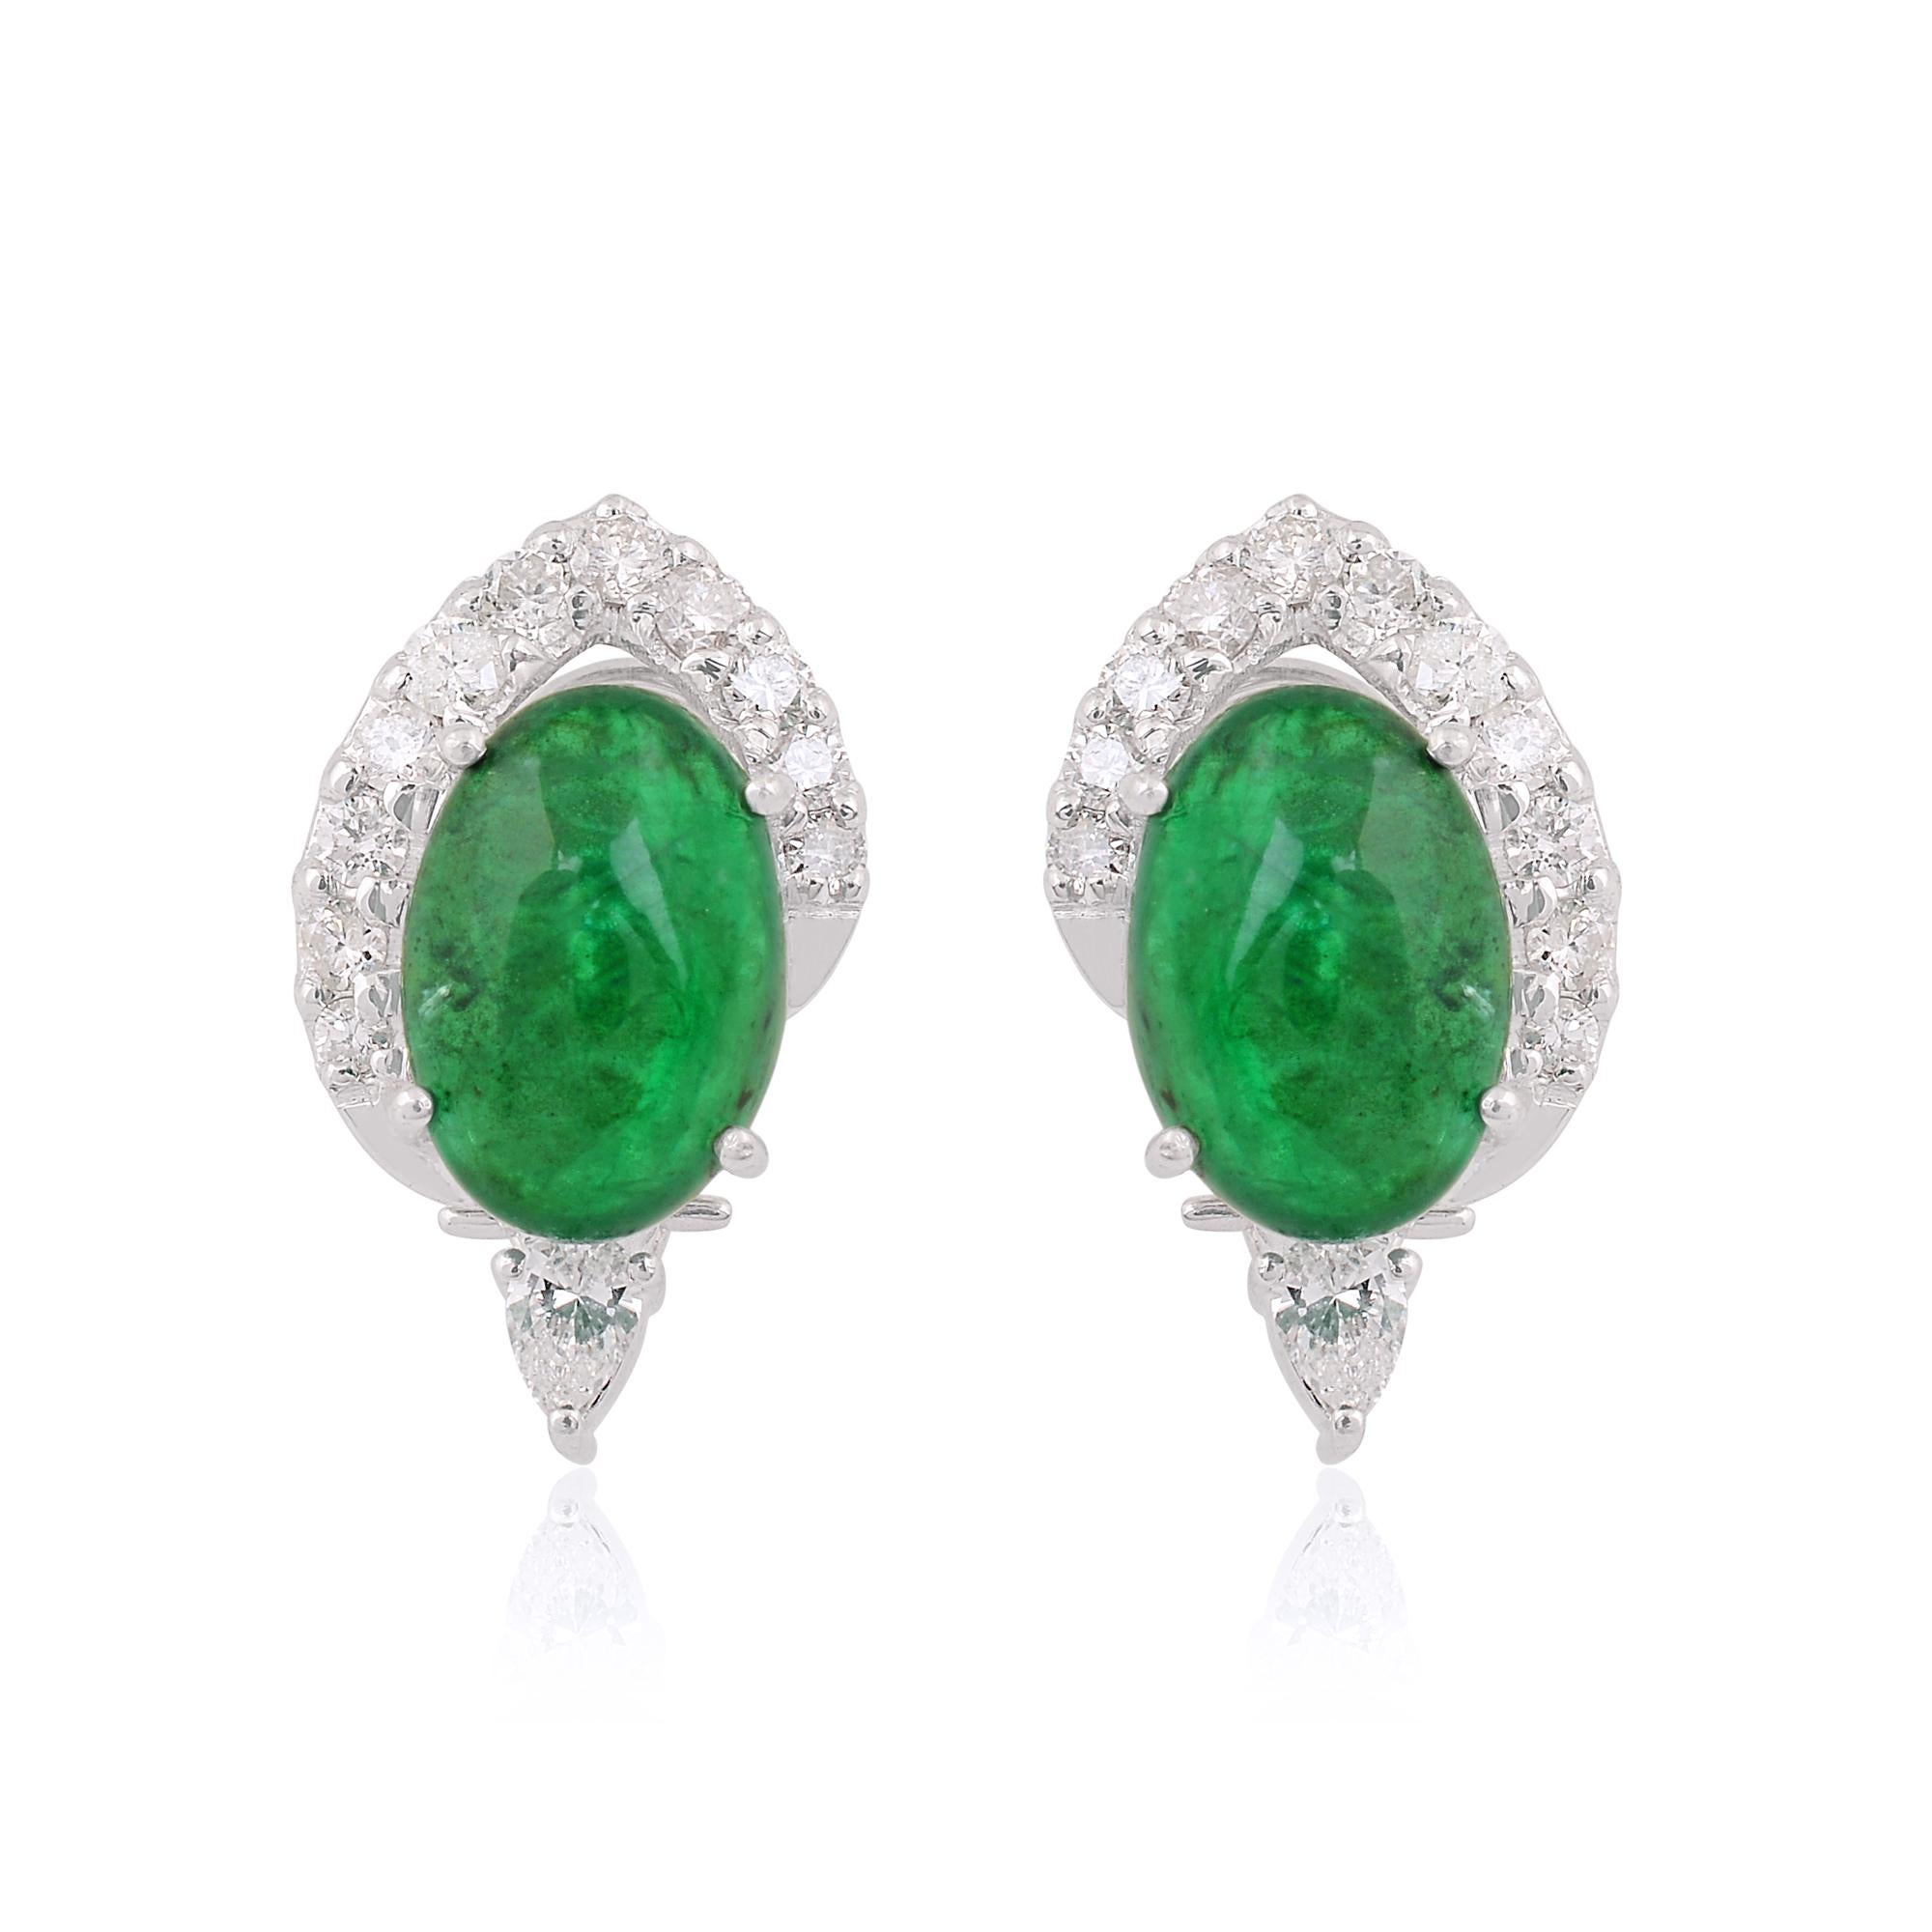 Item Code :- SEE-1192
Gross Wet. :- 7.21 gm
18k Gold Wet. :- 5.63 gm
Diamond Wet. :- 0.95 Ct. ( AVERAGE DIAMOND CLARITY SI1-SI2 & COLOR H-I )
Emerald Wet. :- 6.94 Ct.
Earrings Length :- 19 mm approx.
✦ Sizing
.....................
We can adjust most